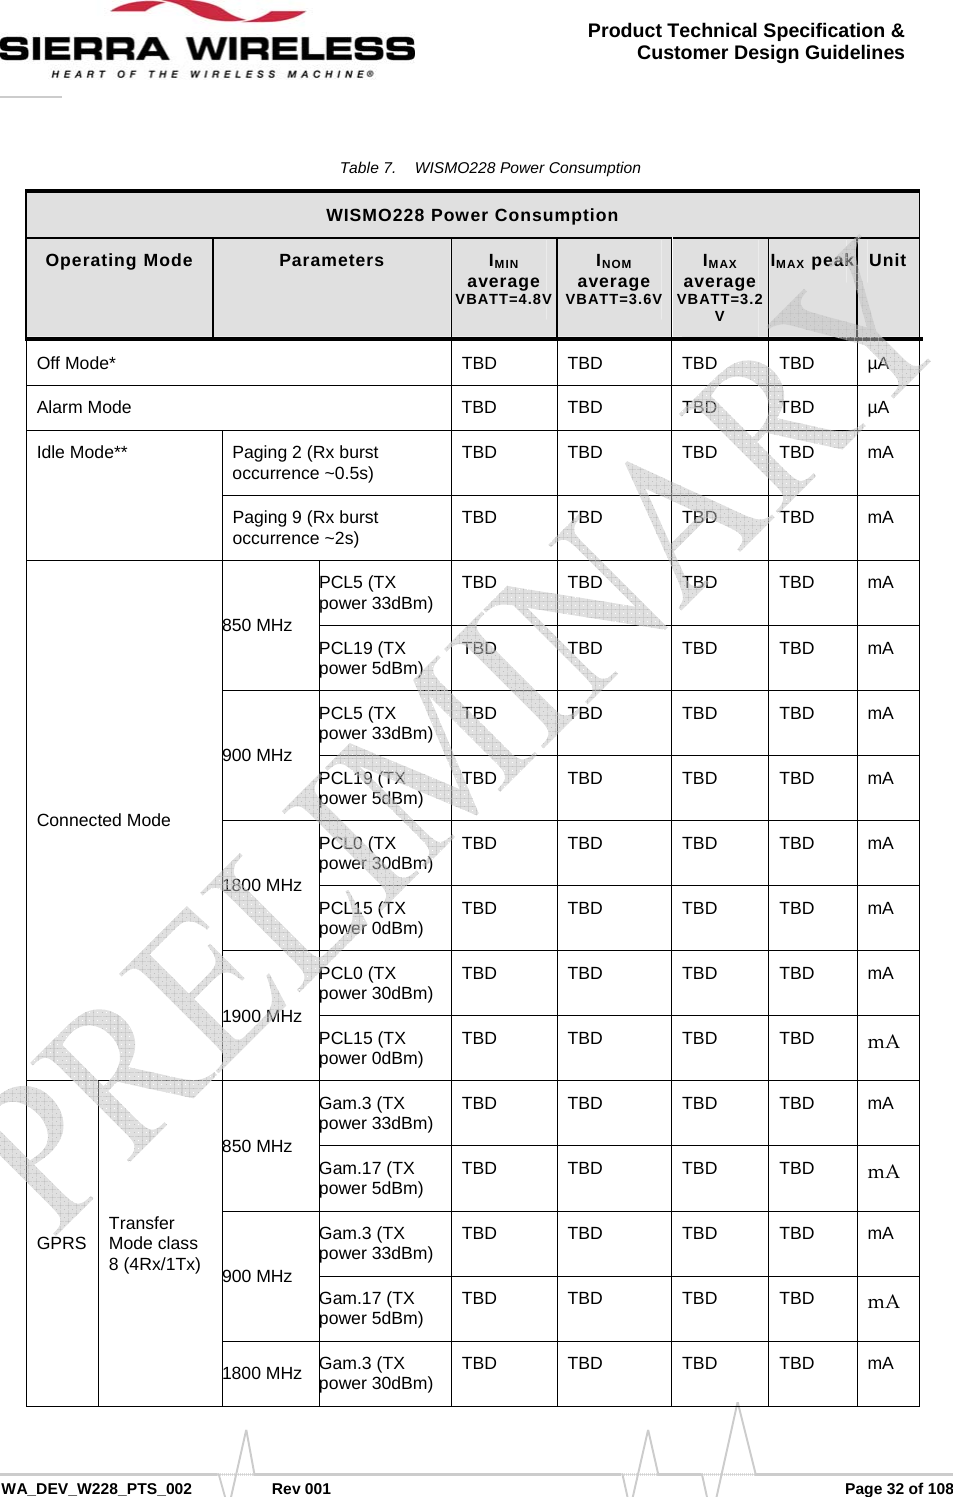      WA_DEV_W228_PTS_002 Rev 001  Page 32 of 108 Product Technical Specification &amp; Customer Design Guidelines Table 7.  WISMO228 Power Consumption WISMO228 Power Consumption Operating Mode  Parameters  IMIN average VBATT=4.8VINOM average VBATT=3.6VIMAX average VBATT=3.2V IMAX peak Unit Off Mode*  TBD  TBD  TBD  TBD  µA Alarm Mode  TBD  TBD  TBD  TBD  µA Idle Mode**  Paging 2 (Rx burst occurrence ~0.5s)  TBD TBD  TBD TBD mA Paging 9 (Rx burst occurrence ~2s)  TBD TBD  TBD TBD mA Connected Mode 850 MHz PCL5 (TX power 33dBm)  TBD TBD  TBD TBD mA PCL19 (TX power 5dBm)  TBD TBD  TBD TBD mA 900 MHz PCL5 (TX power 33dBm)  TBD TBD  TBD TBD mA PCL19 (TX power 5dBm)  TBD TBD  TBD TBD mA 1800 MHz PCL0 (TX power 30dBm)  TBD TBD  TBD TBD mA PCL15 (TX power 0dBm)  TBD TBD  TBD TBD mA 1900 MHz PCL0 (TX power 30dBm)  TBD TBD  TBD TBD mA PCL15 (TX power 0dBm)  TBD TBD  TBD TBD mAGPRS  Transfer Mode class 8 (4Rx/1Tx) 850 MHz Gam.3 (TX power 33dBm)  TBD TBD  TBD TBD mA Gam.17 (TX power 5dBm)  TBD TBD  TBD TBD mA900 MHz Gam.3 (TX power 33dBm)  TBD TBD  TBD TBD mA Gam.17 (TX power 5dBm)  TBD TBD  TBD TBD mA1800 MHz  Gam.3 (TX power 30dBm)  TBD TBD  TBD TBD mA    